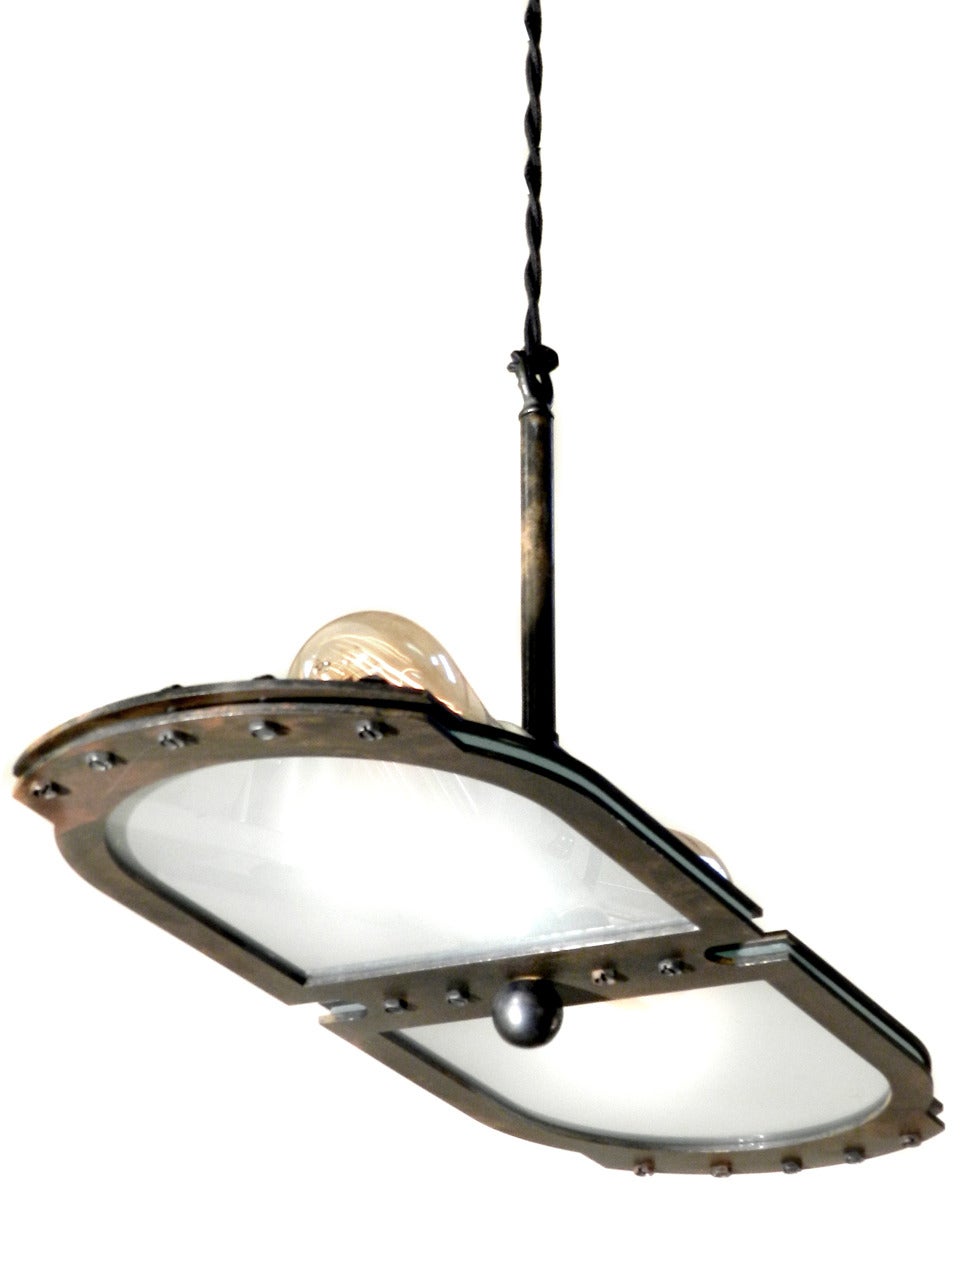 This small tracery style Industrial pendant fits comfortably with most styles. It's very architectural with clean lines… just look at the profile. The heavy steel frame has an aged patina and Industrial accents that are not over done. We designed